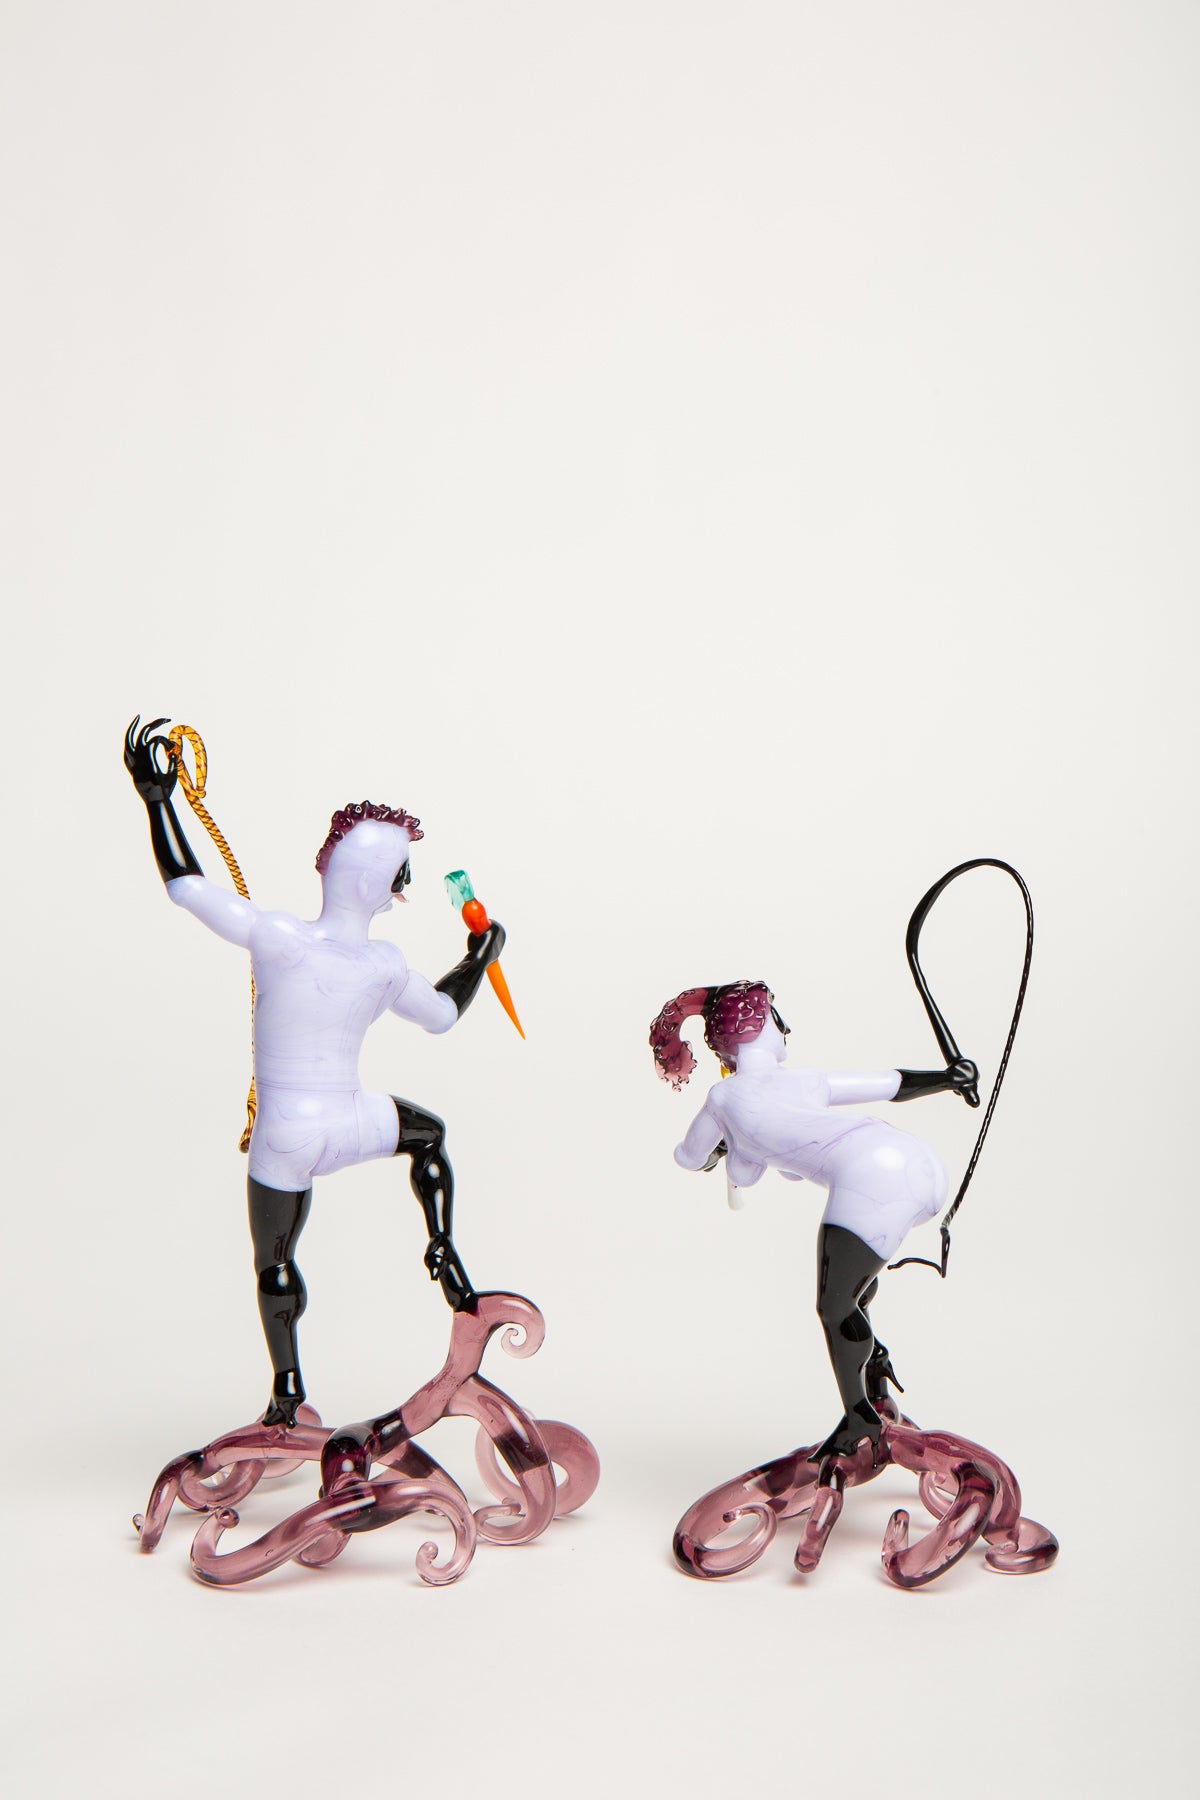 MAXFIELD PRIVATE COLLECTION | MAN AND WOMAN GLASS FIGURES